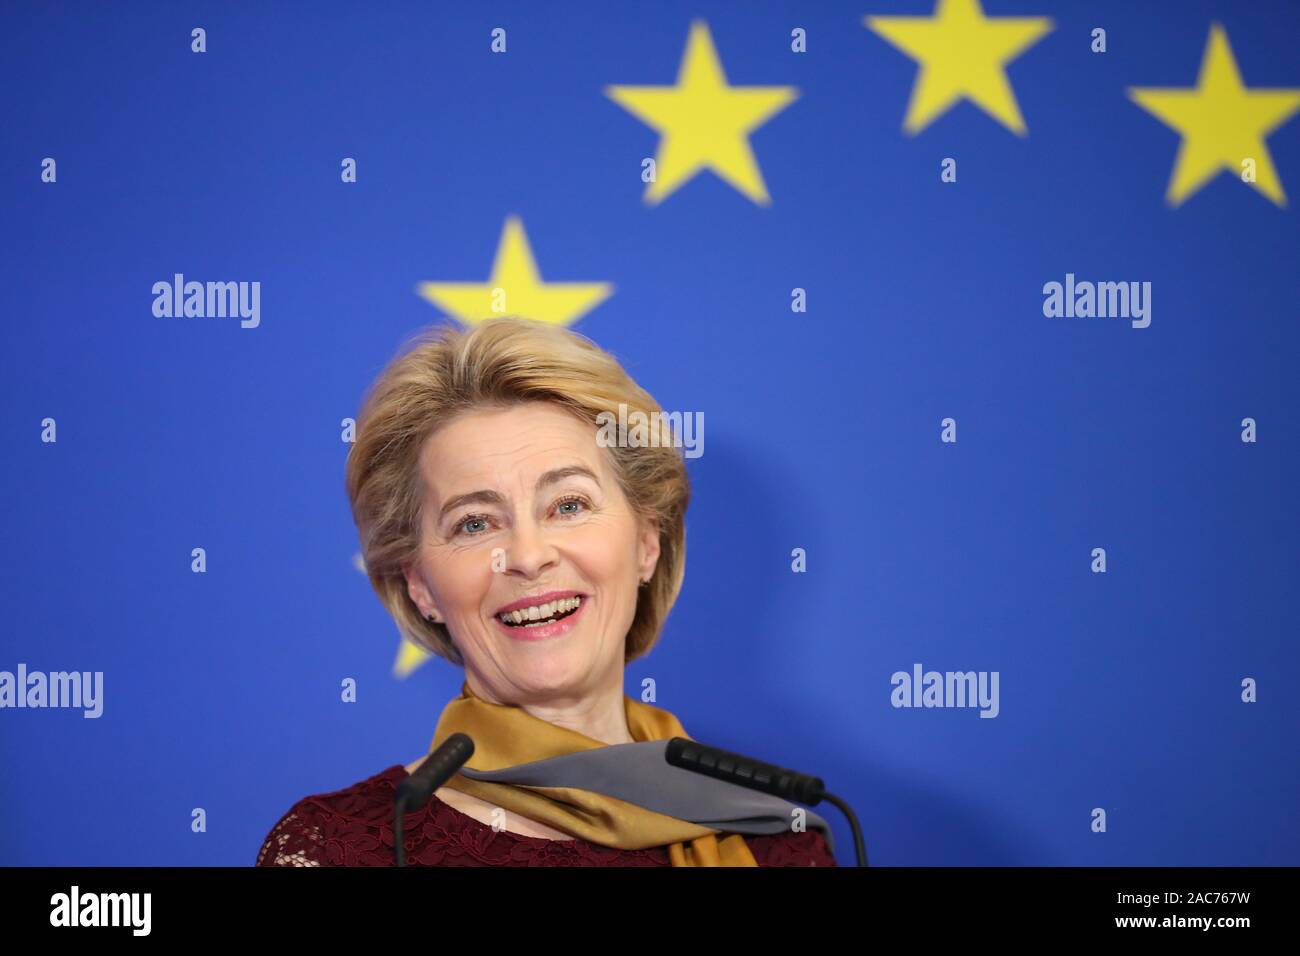 (191201) -- BRUSSELS, Dec. 1, 2019 (Xinhua) -- European Commission President Ursula von der Leyen delivers a speech during a ceremony to mark the 10th anniversary of the entry into force of the Lisbon Treaty, at the House of European History in Brussels, Belgium, Dec. 1, 2019. (Xinhua/Zhang Cheng) Stock Photo